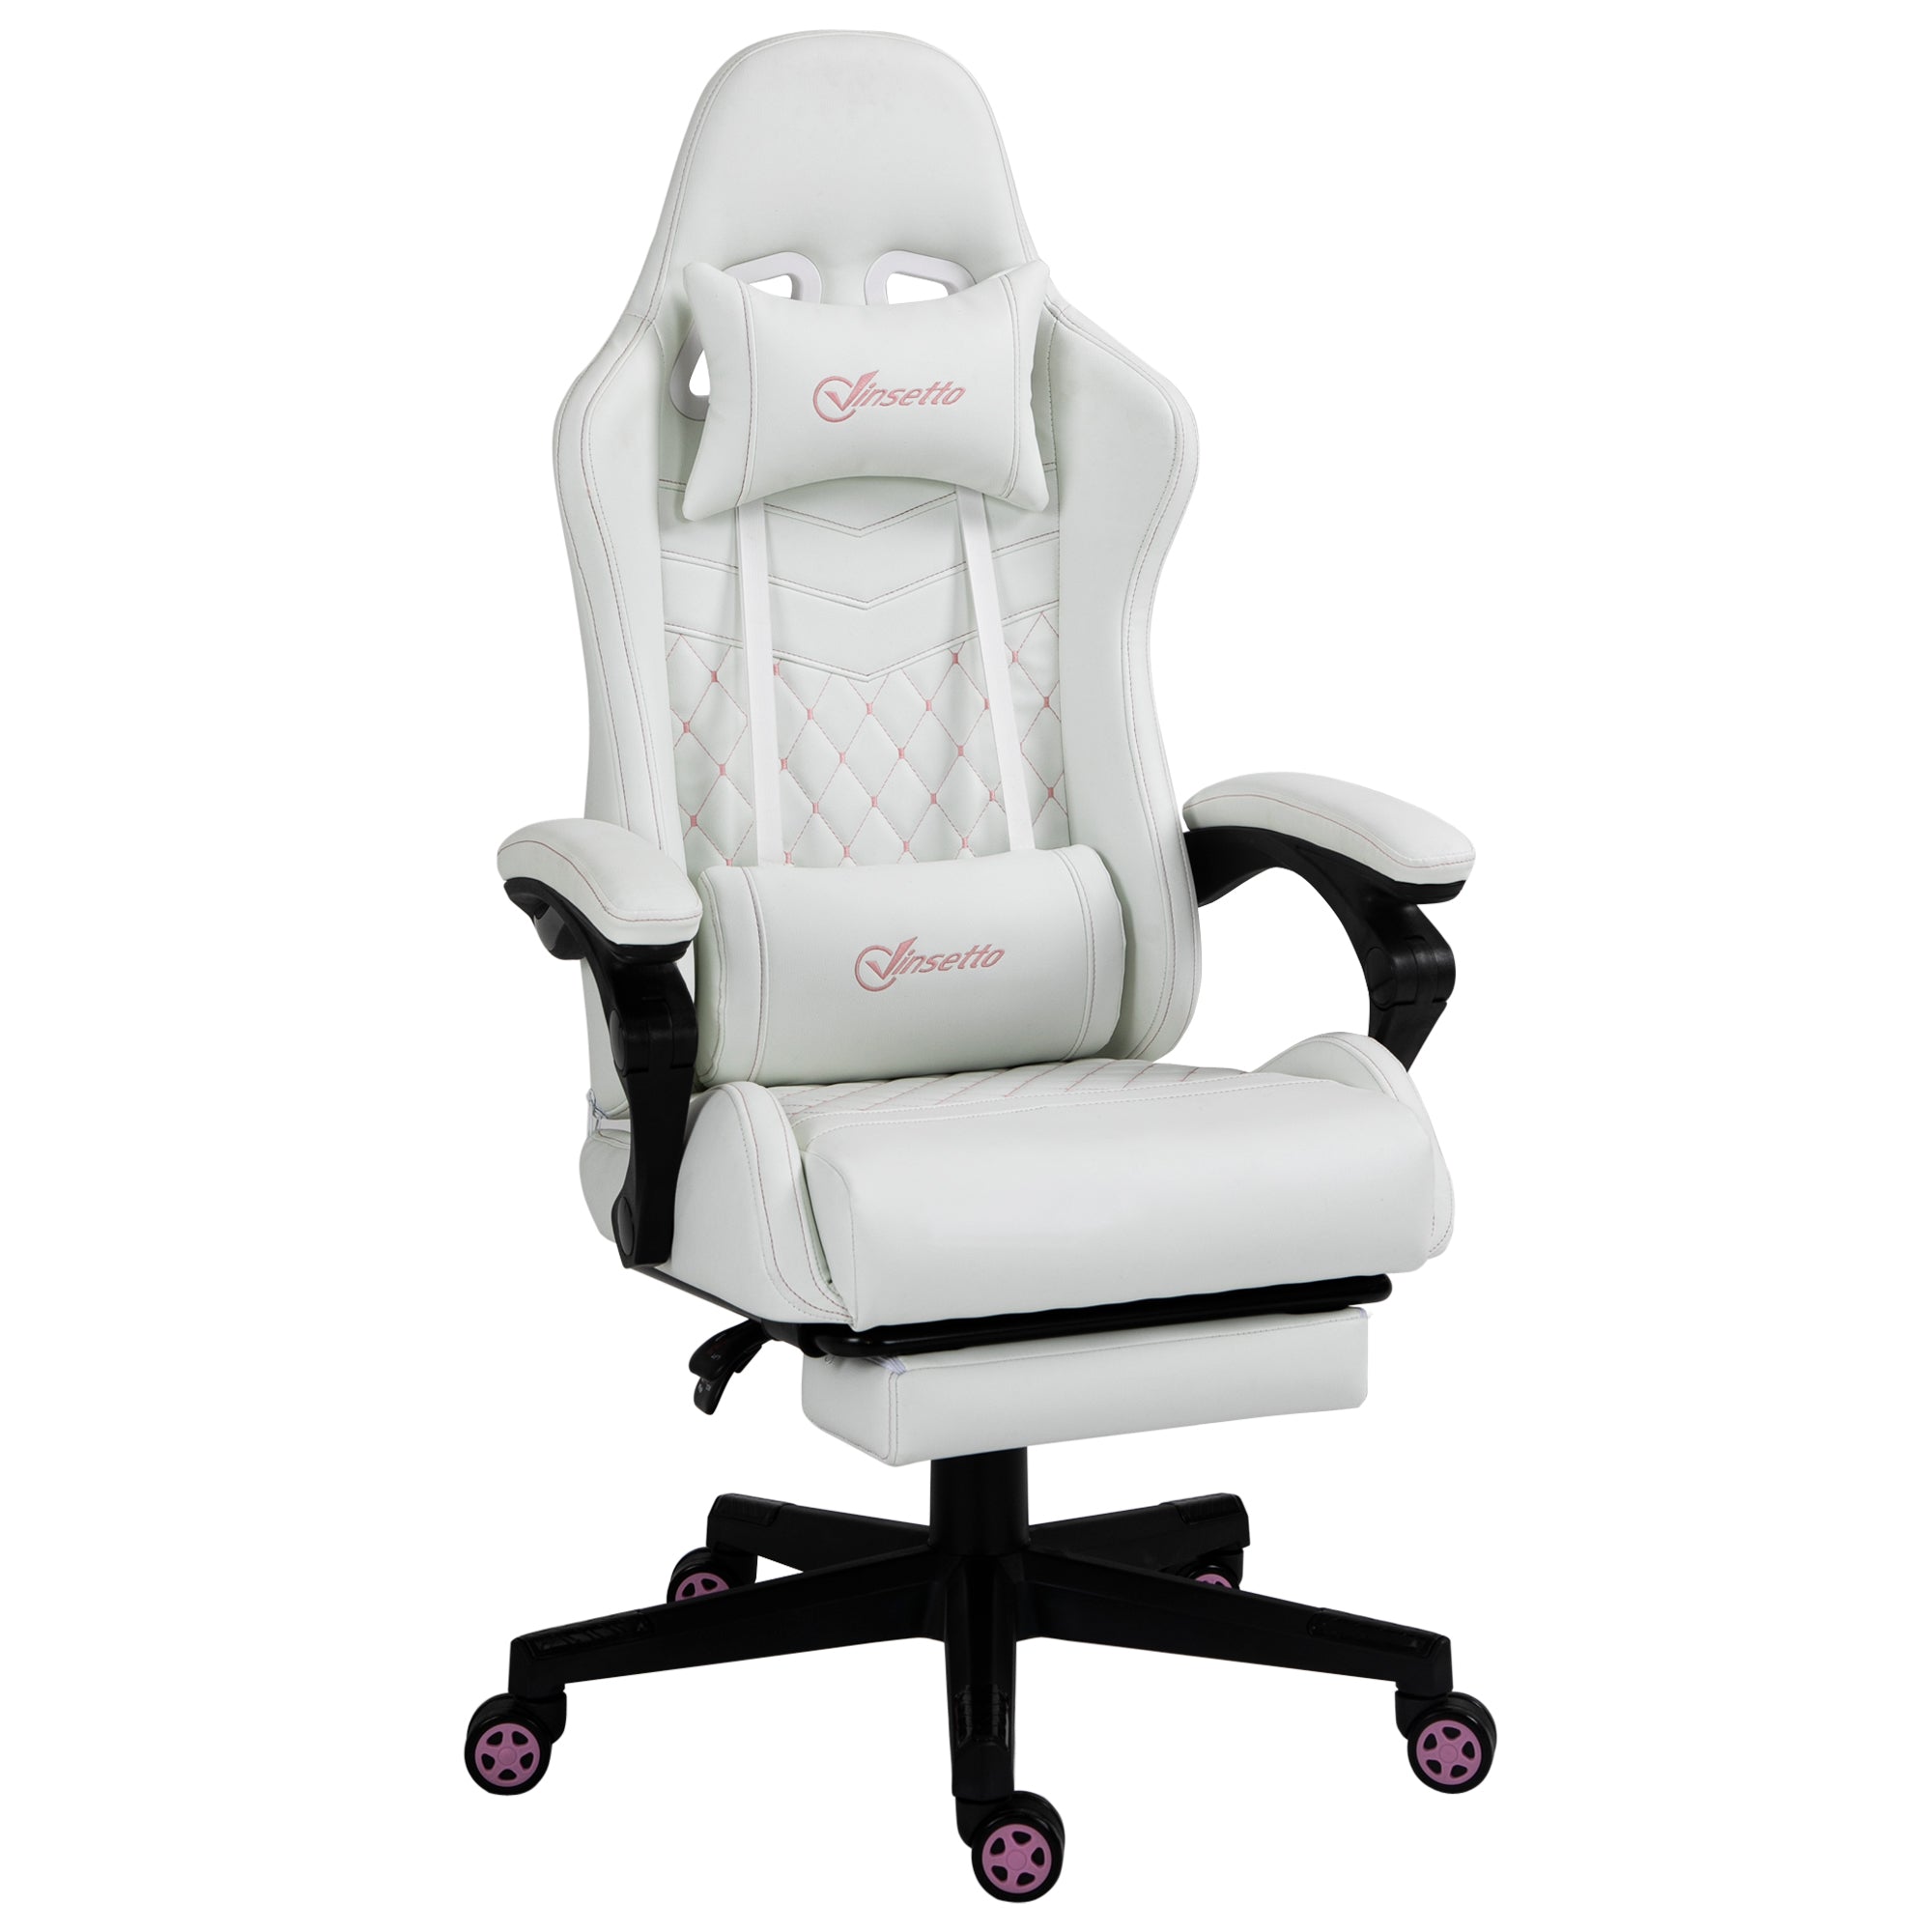 Vinsetto Racing Gaming Chair with Swivel Wheel, Footrest, PU Leather Recliner Gamer Desk for Home Office, White